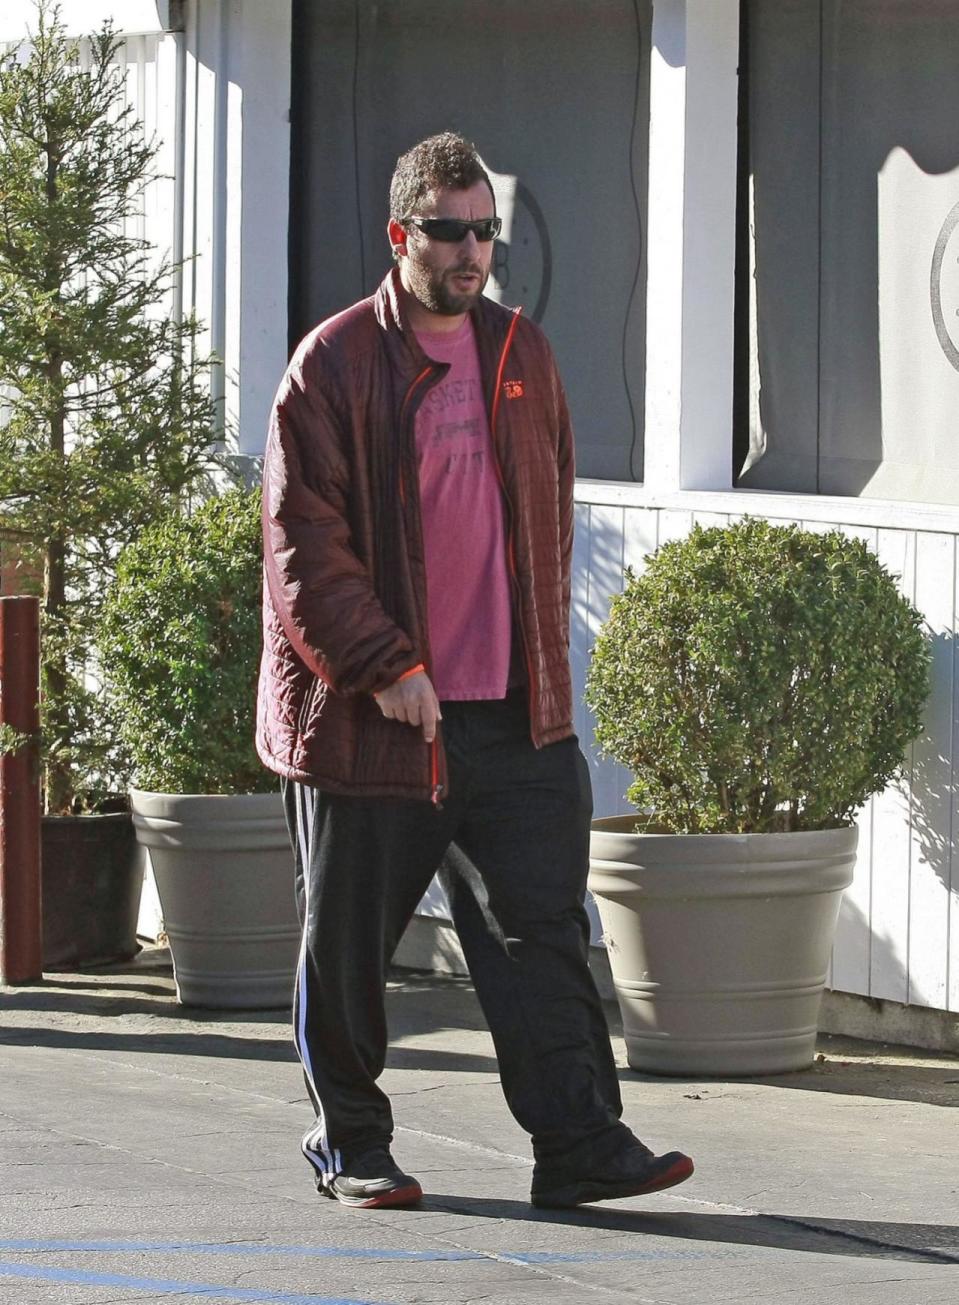 <p>Sandler, we’d recognize those track pants anywhere! (Photo: Bauer-Griffin/FilmMagic)</p>